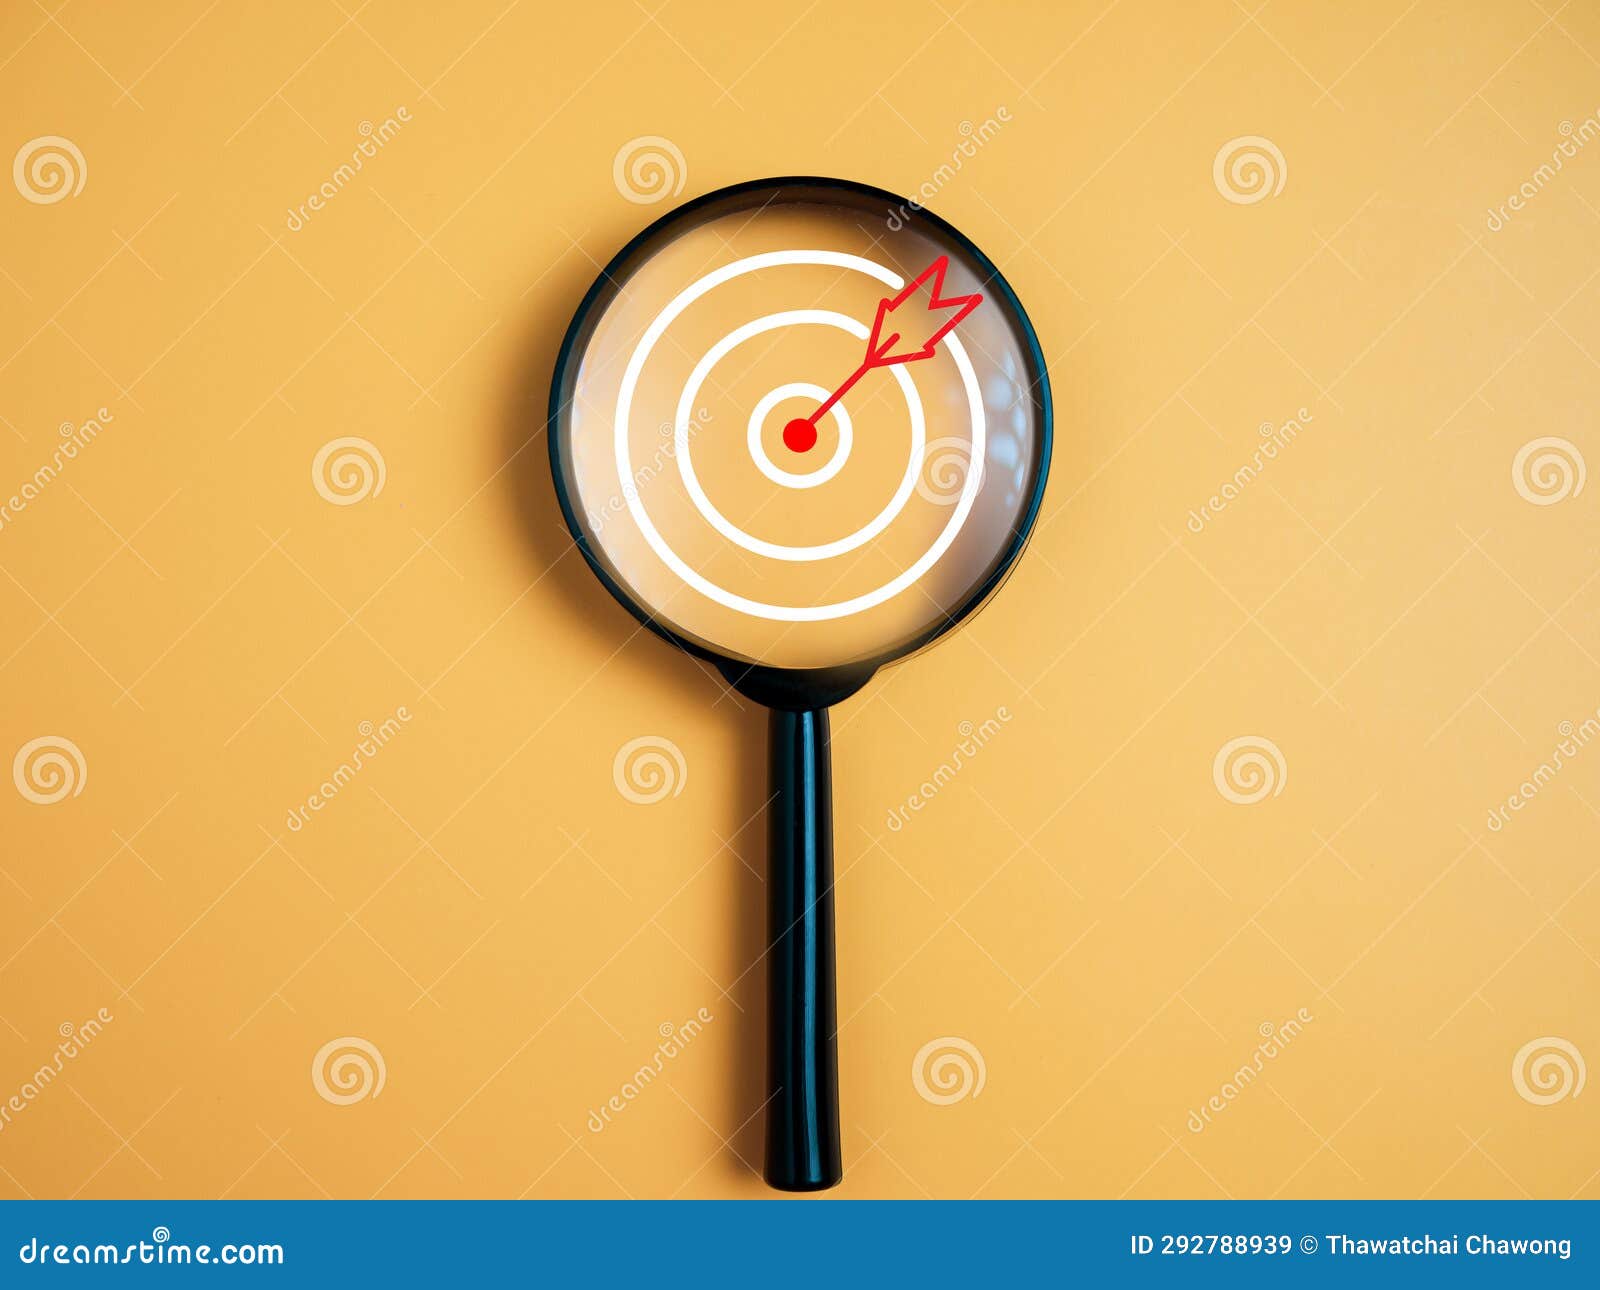 target, objective, goal achievement, purposefulness concept. magnifying glass focus on dartboard icon over yellow background